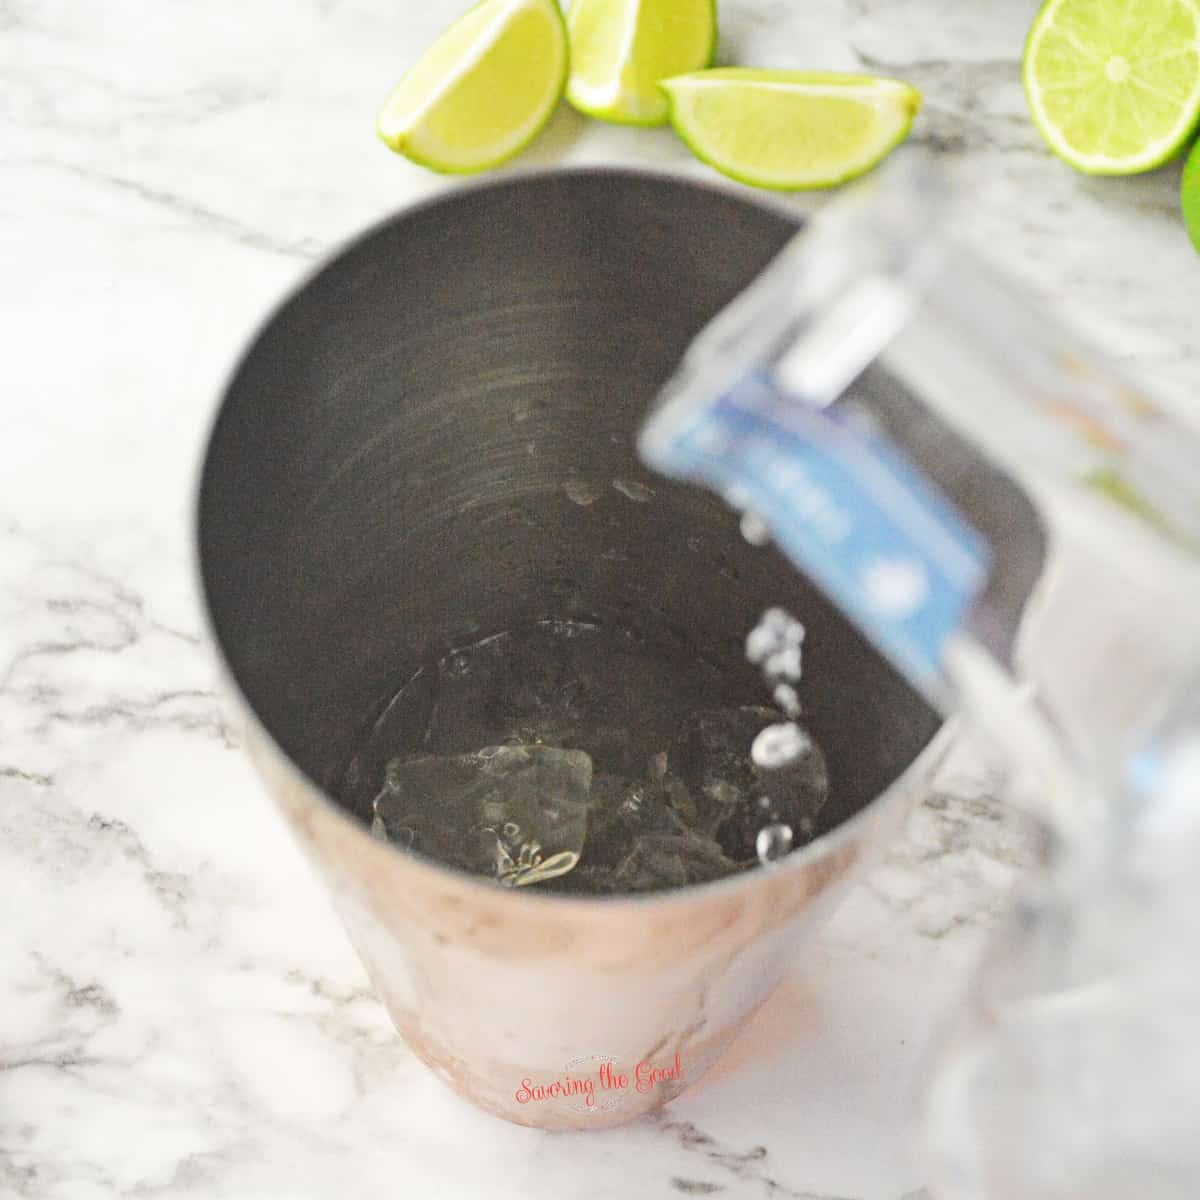 tequila being added to the ice filled shaker.